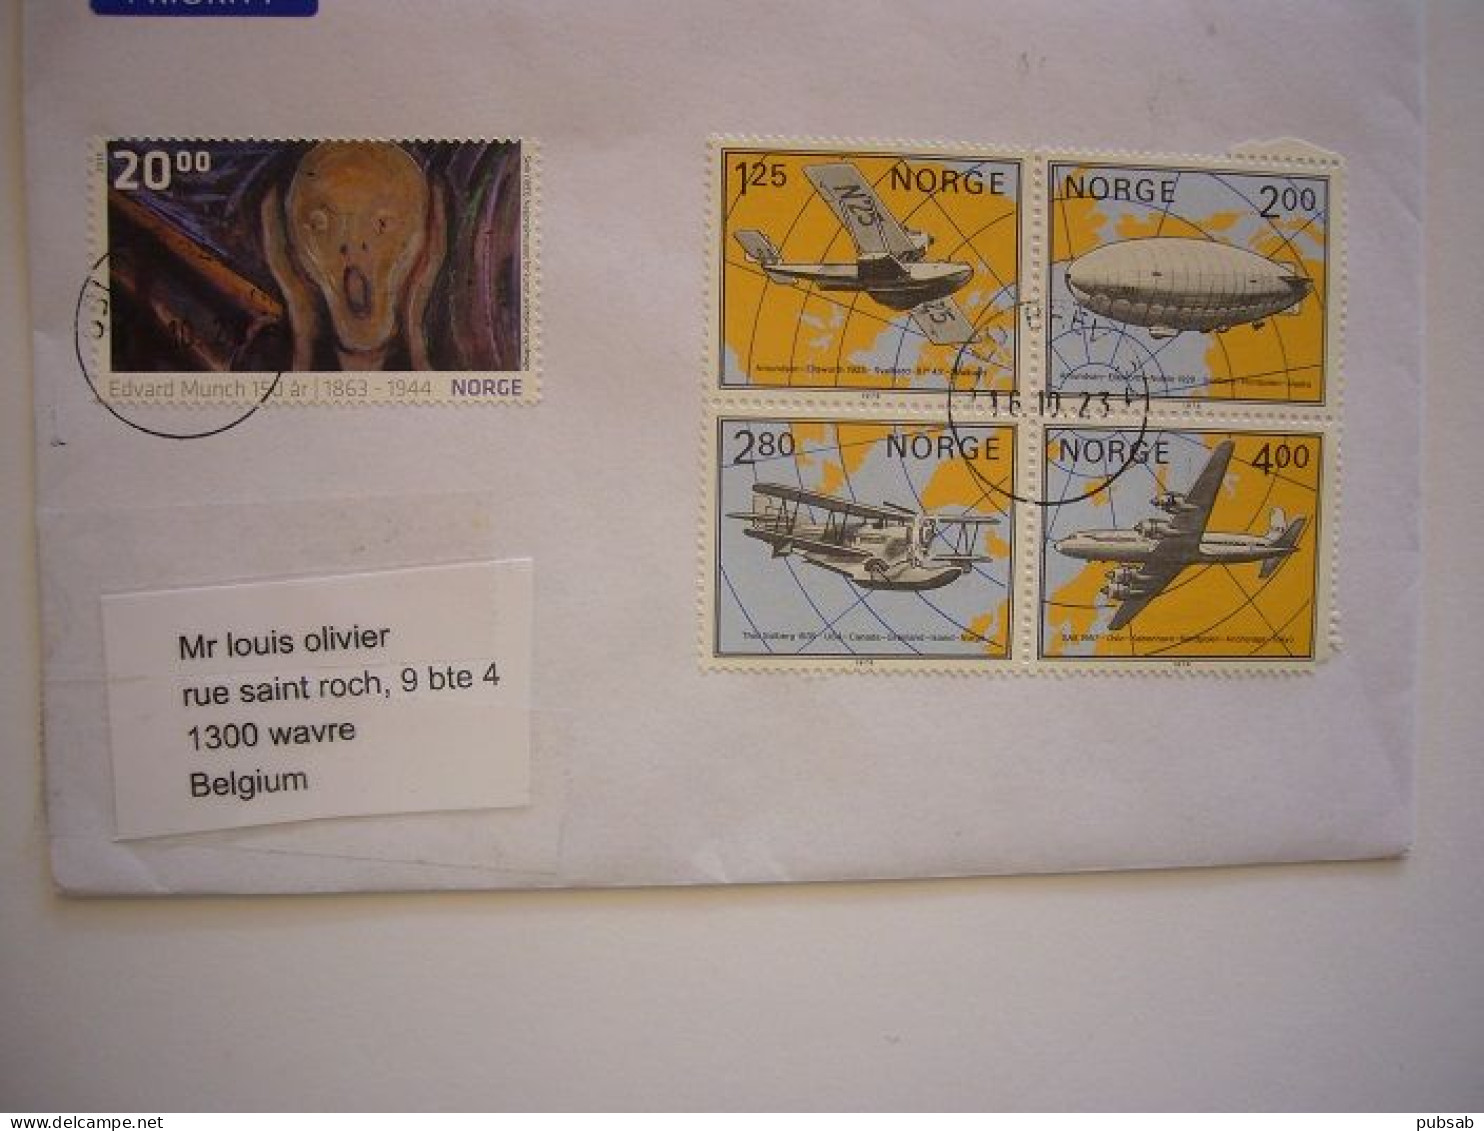 Avion / Airplane / NORGE / Letter From Rolvsoy, Fredrikstad To Wavre, Belgium / Airline Stamps - Briefe U. Dokumente